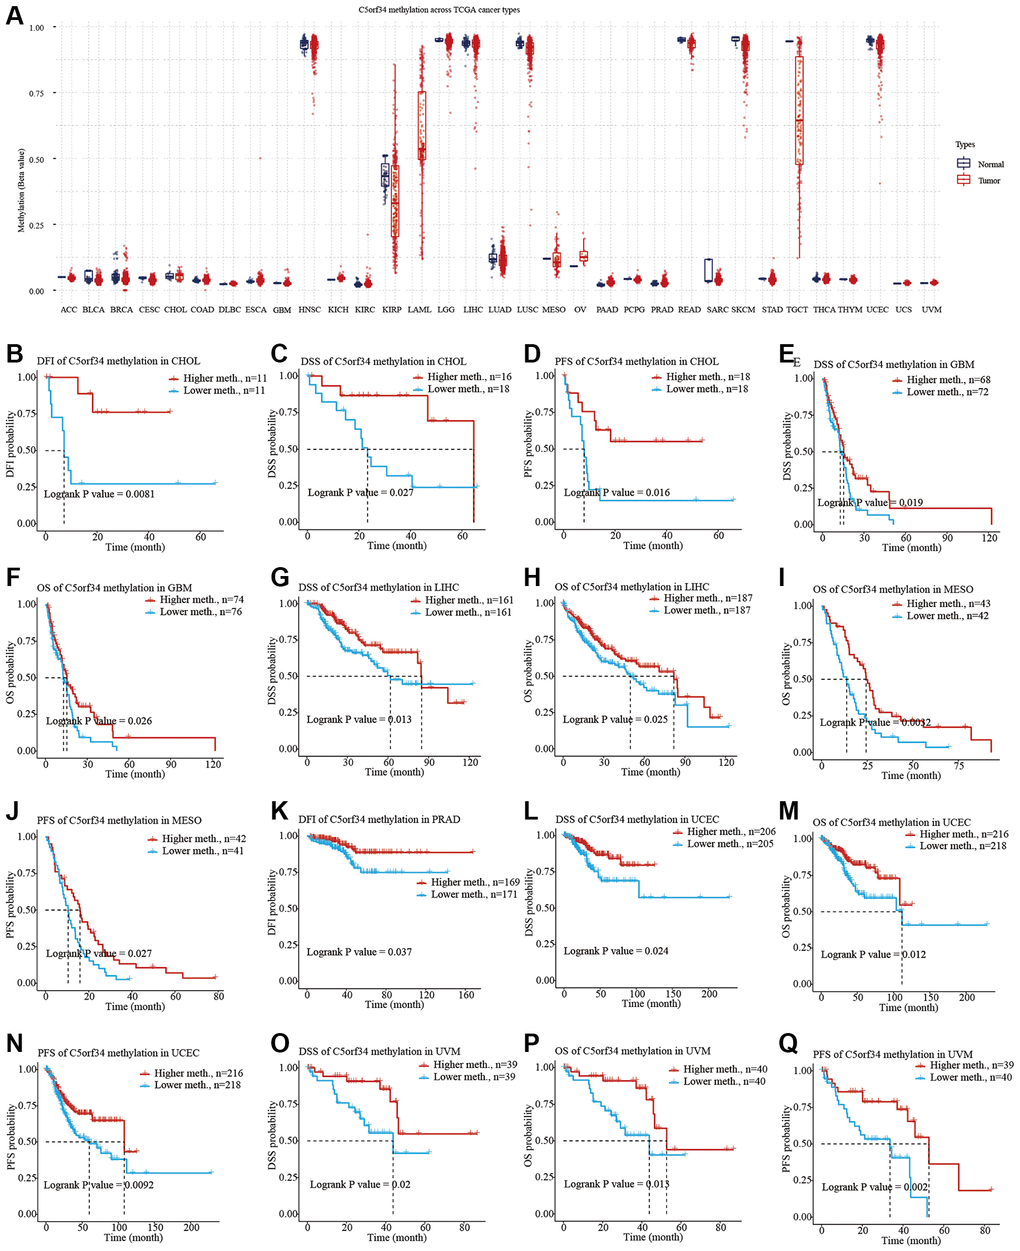 C5orf34 methylation landscape on TCGA cancer types. (A) The methylation level of C5orf34 differs dramatically between normal and malignant tissues; (B–Q) In UCEC, LIHC, PRAD, MESO, CHOL, GBM, and UVM, there was a correlation between C5orf34 methylation and patient prognosis.